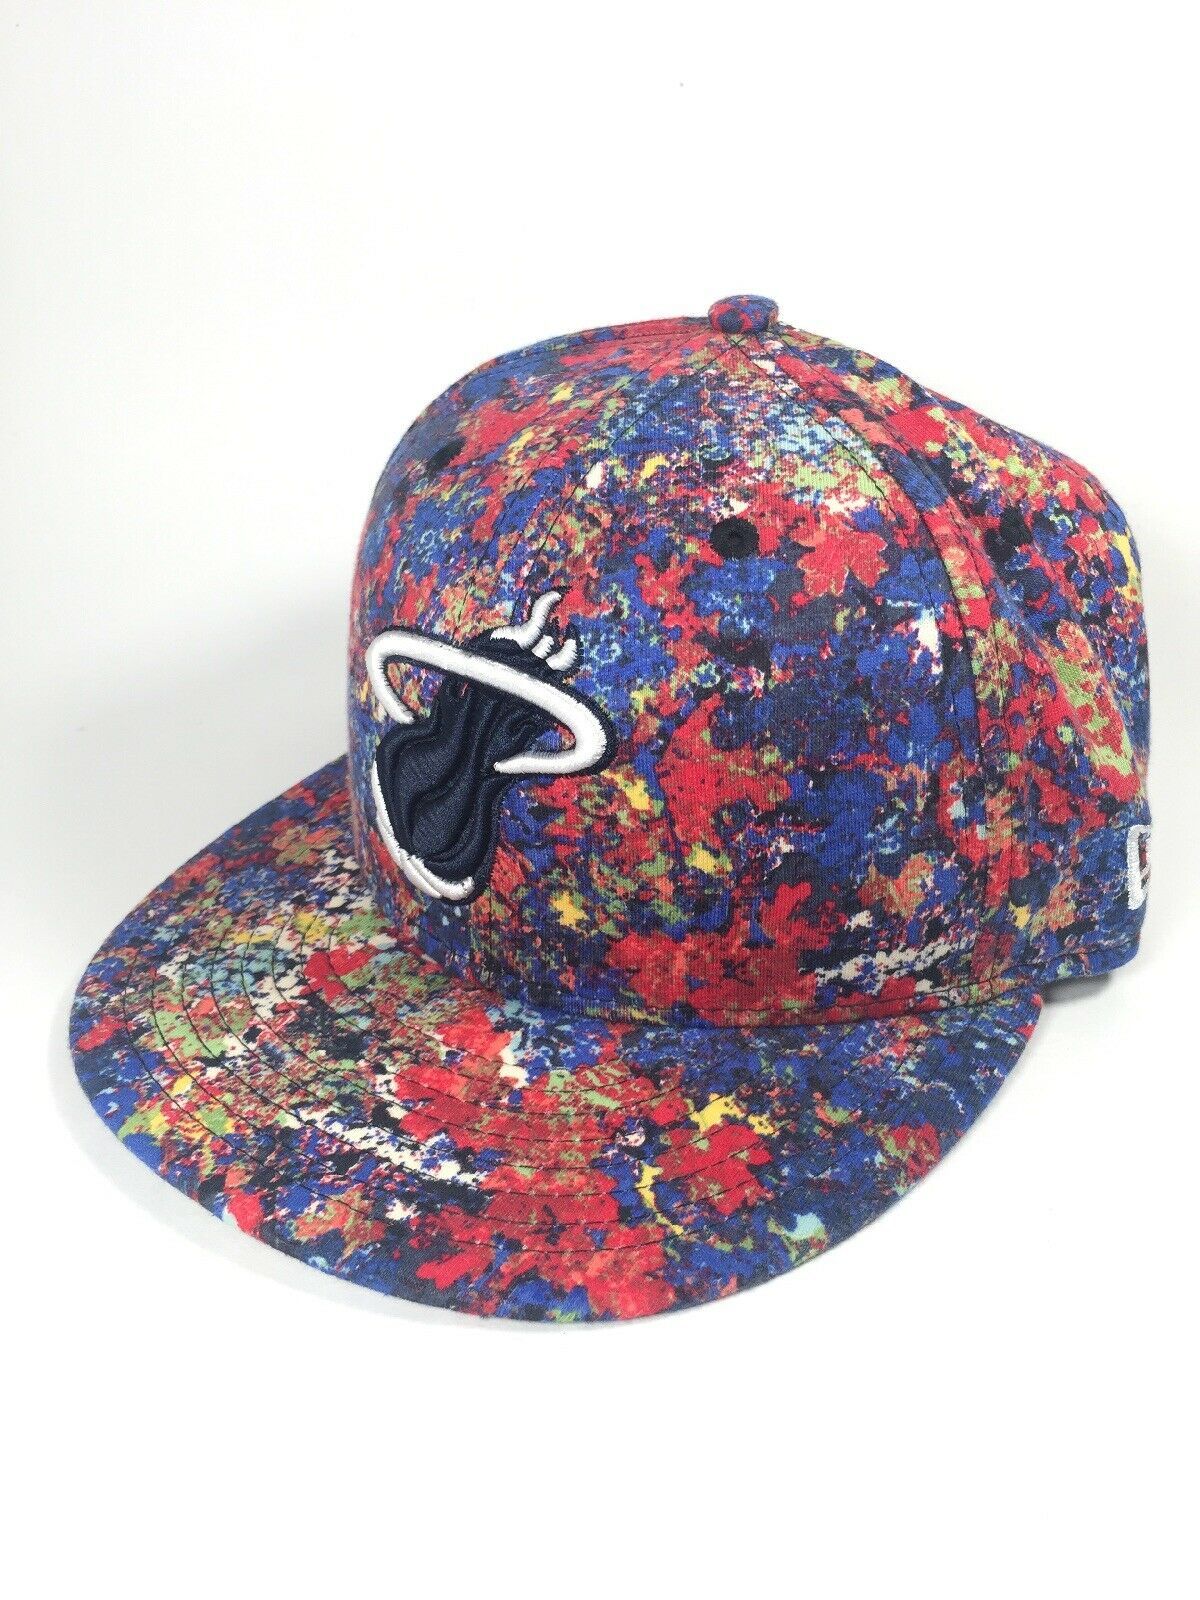 Miami Heat Liberty London NBA New Era 59Fifty - Floral SIZE 7 1/4 Fitted Cap Hat - $17.87